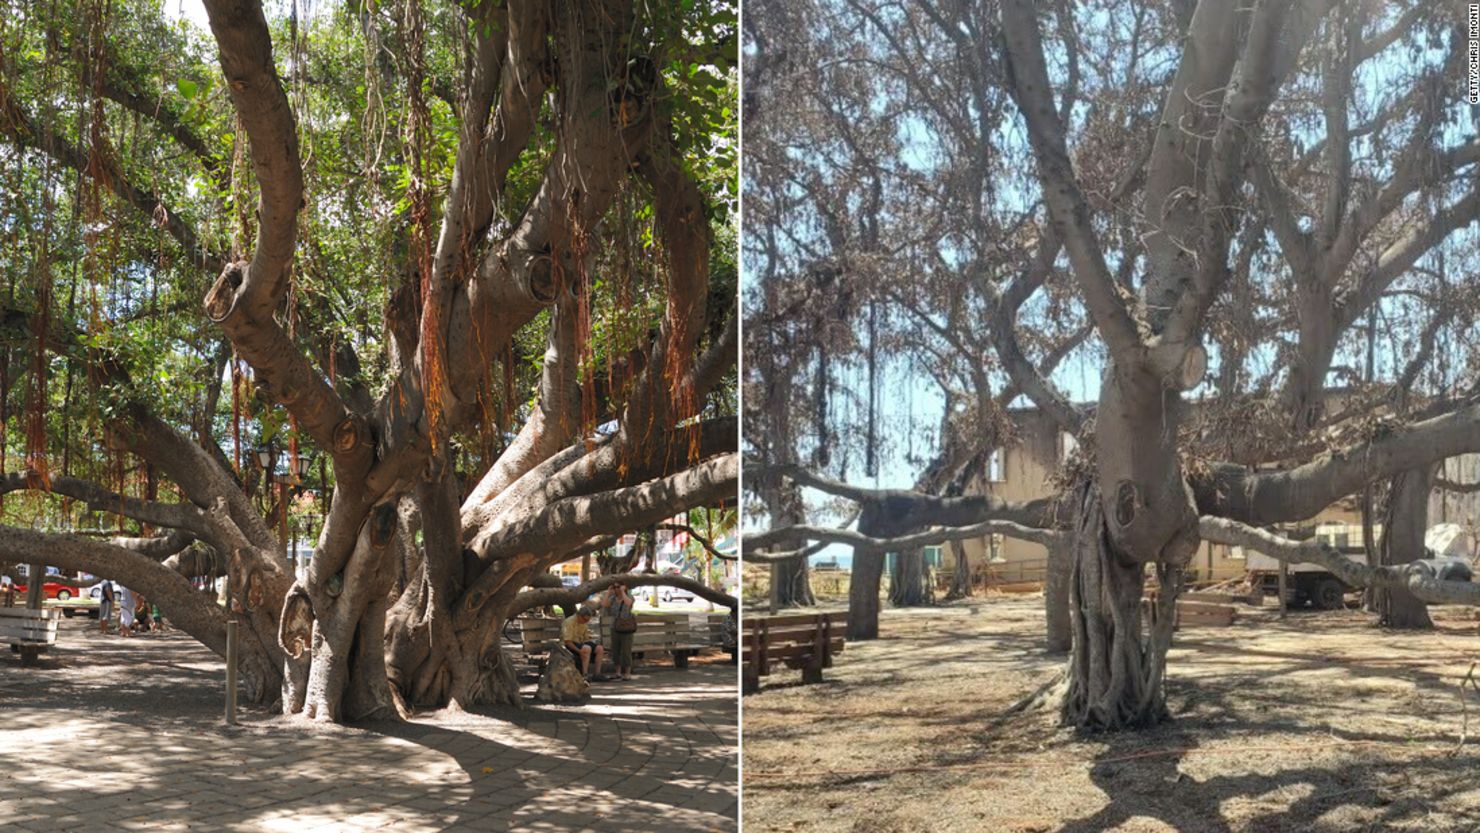 From left, the banyan tree in Lahaina, Hawaii, is pictured in 2011 and 2023.